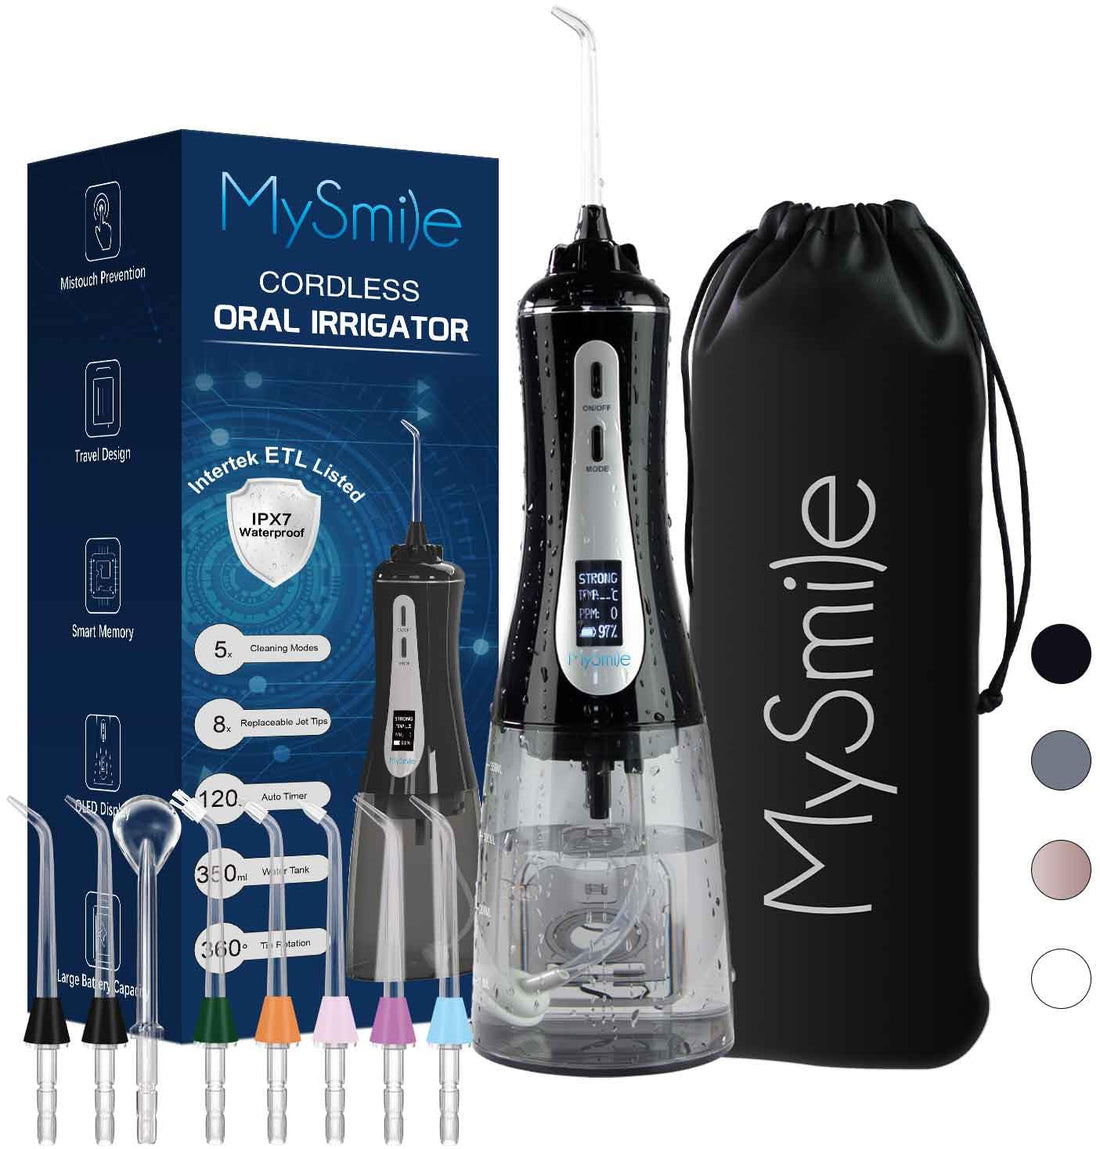 MySmile Powerful Cordless Water Dental Flosser Portable Oral Irrigator with OLED Display 5 Modes 8 Replaceable Jet Tips and 350 ML Detachable Water Tank for Home Travel Use (Black)